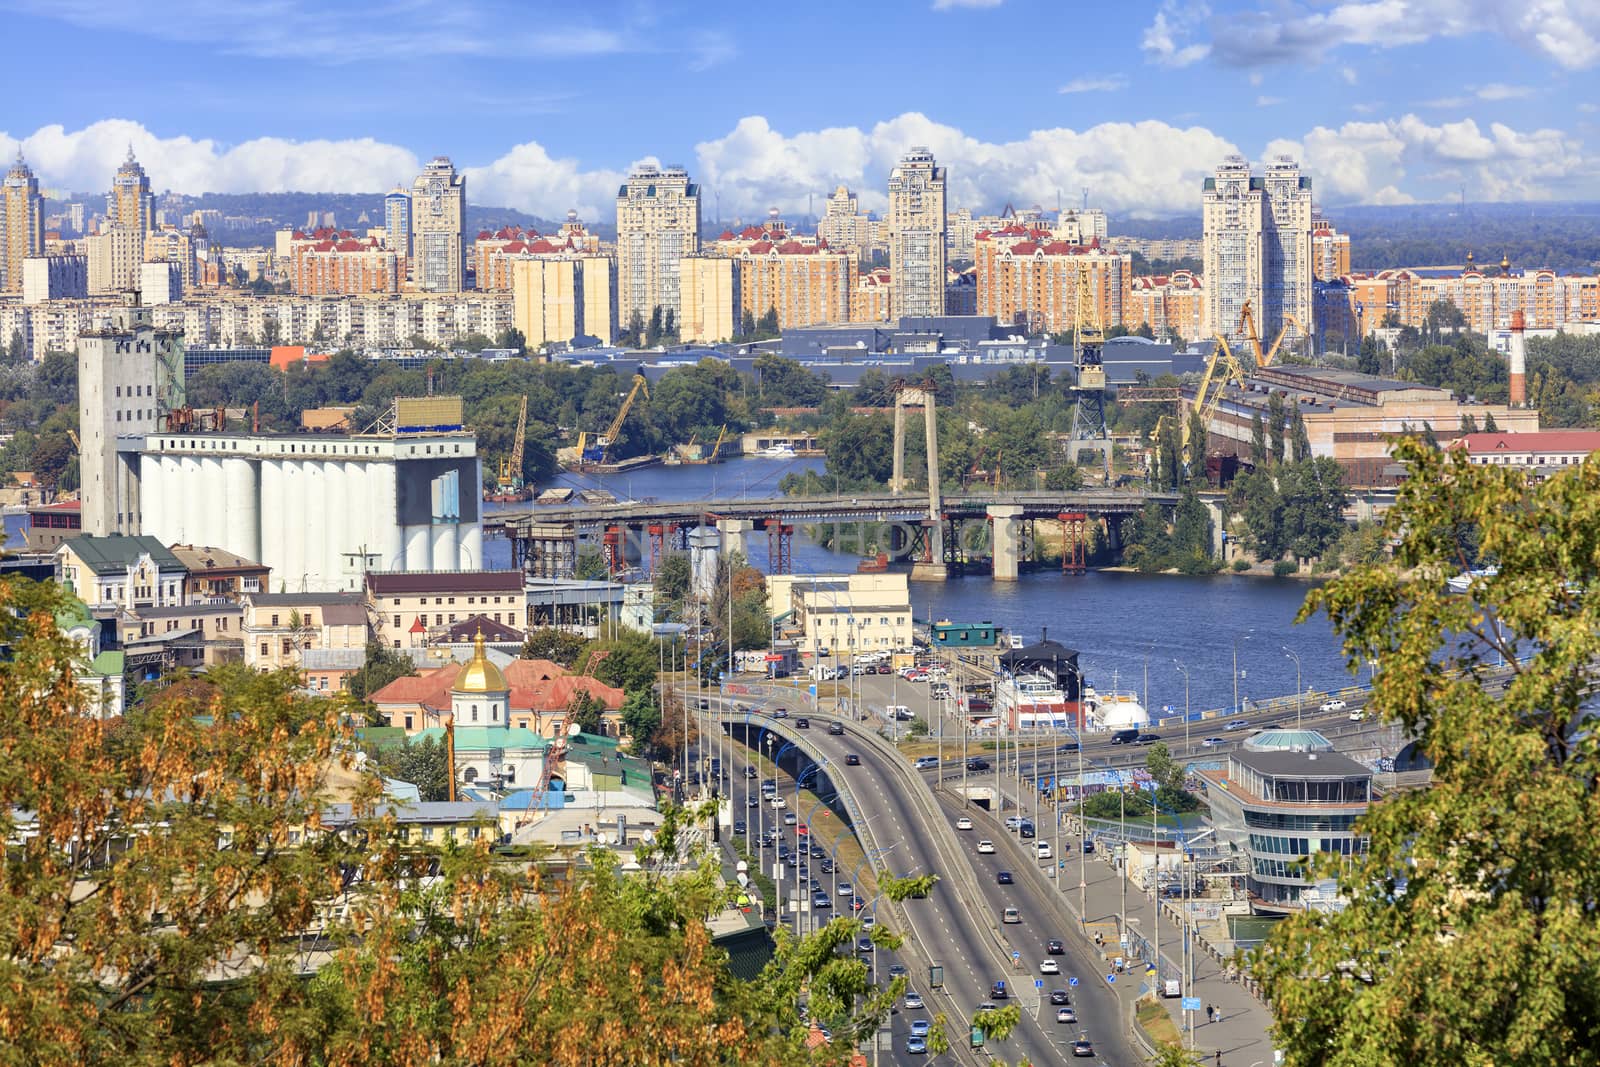 The landscape of the autumn city of Kyiv with a view of the Dnipro River, many bridges, the old Podilsky district and new houses on Obolon. by Sergii